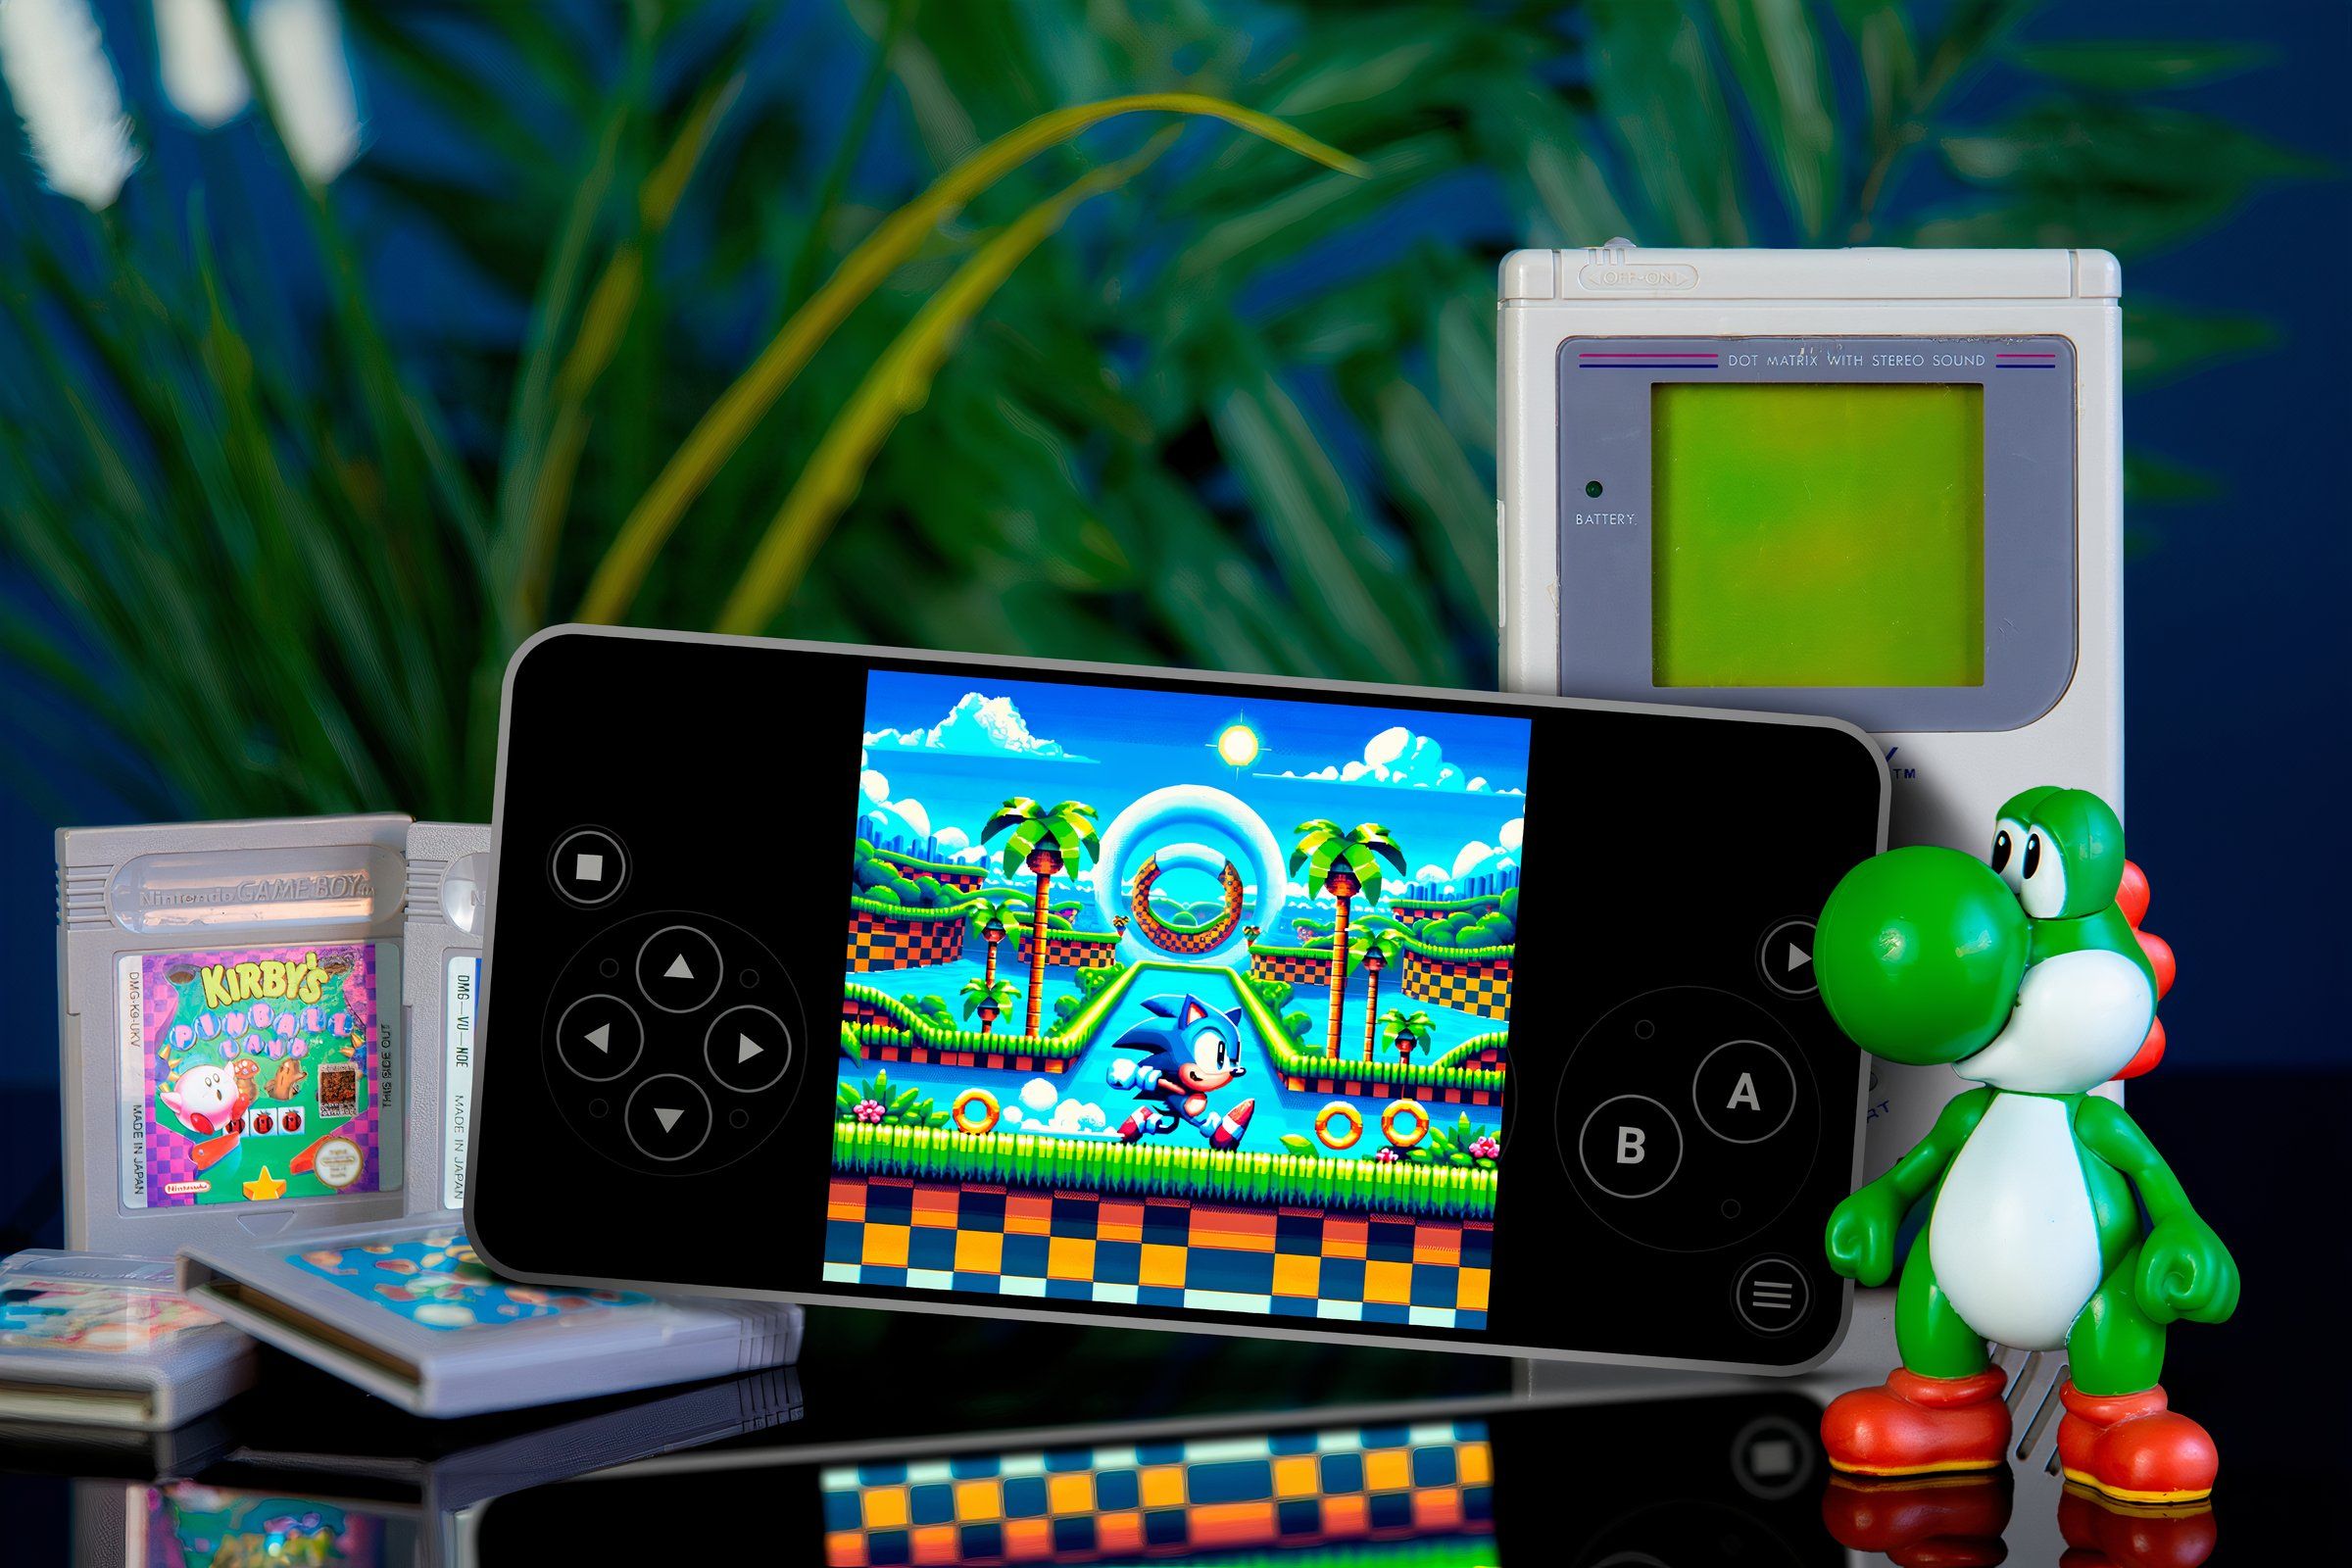 A phone running sonic game in an emulator with some cartridges around with Yoshi figure on the right and a gameboy behind.